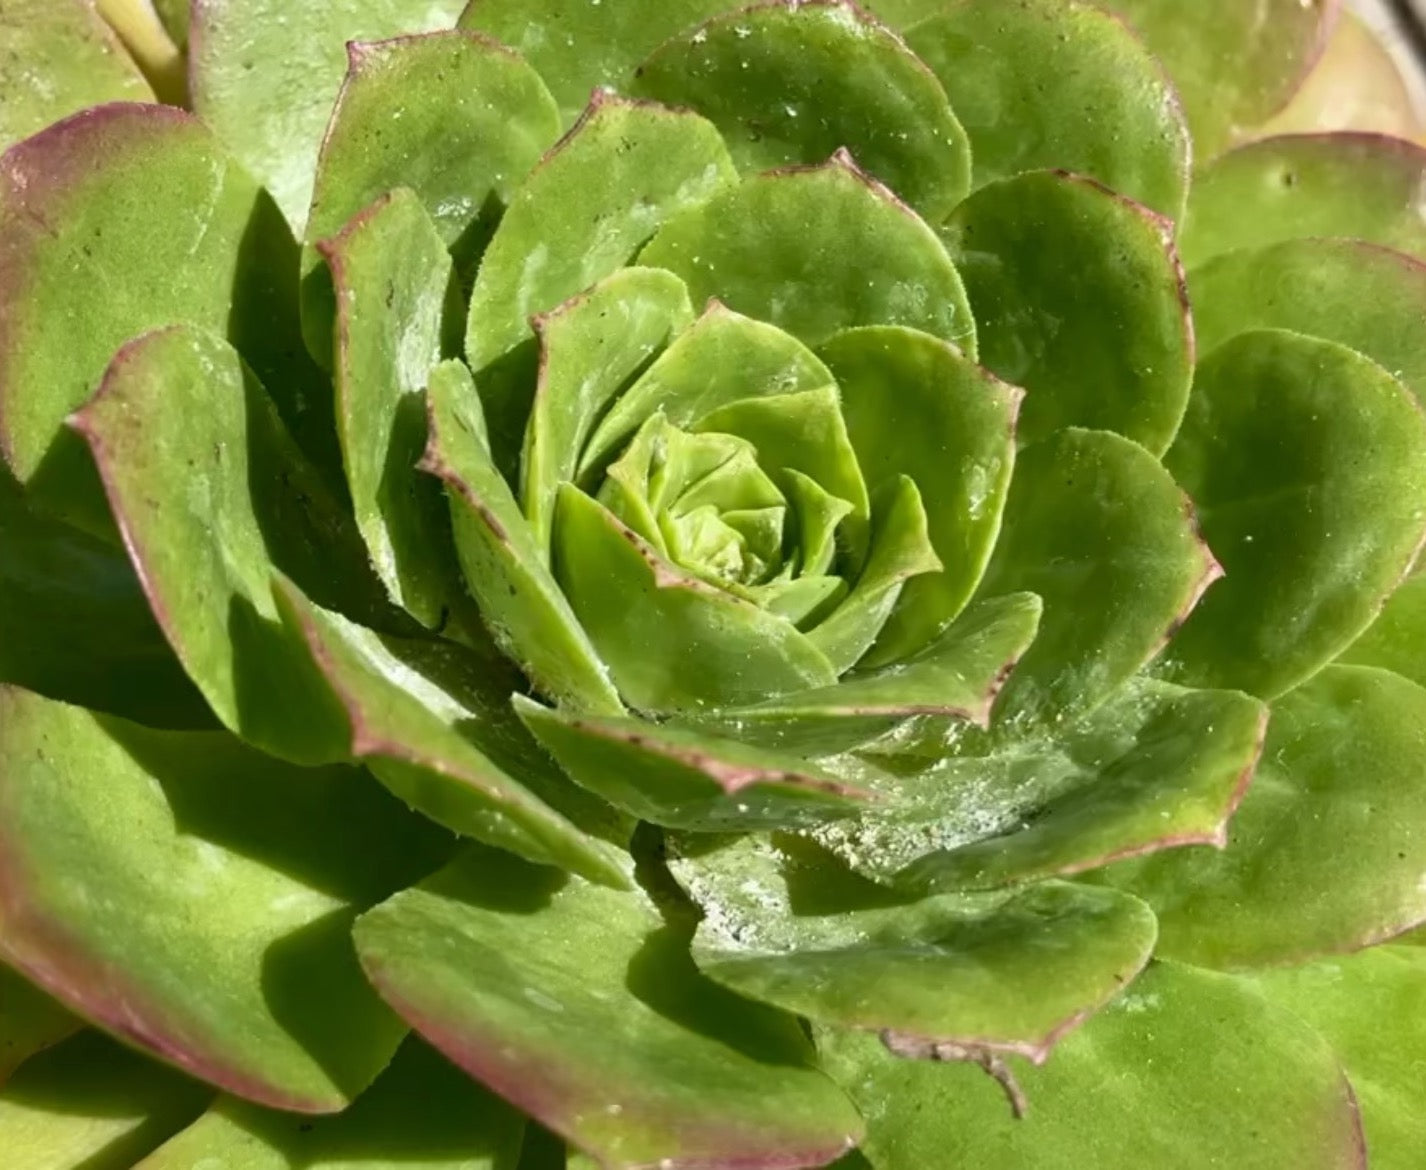 How to treat your succulents for Mealybugs